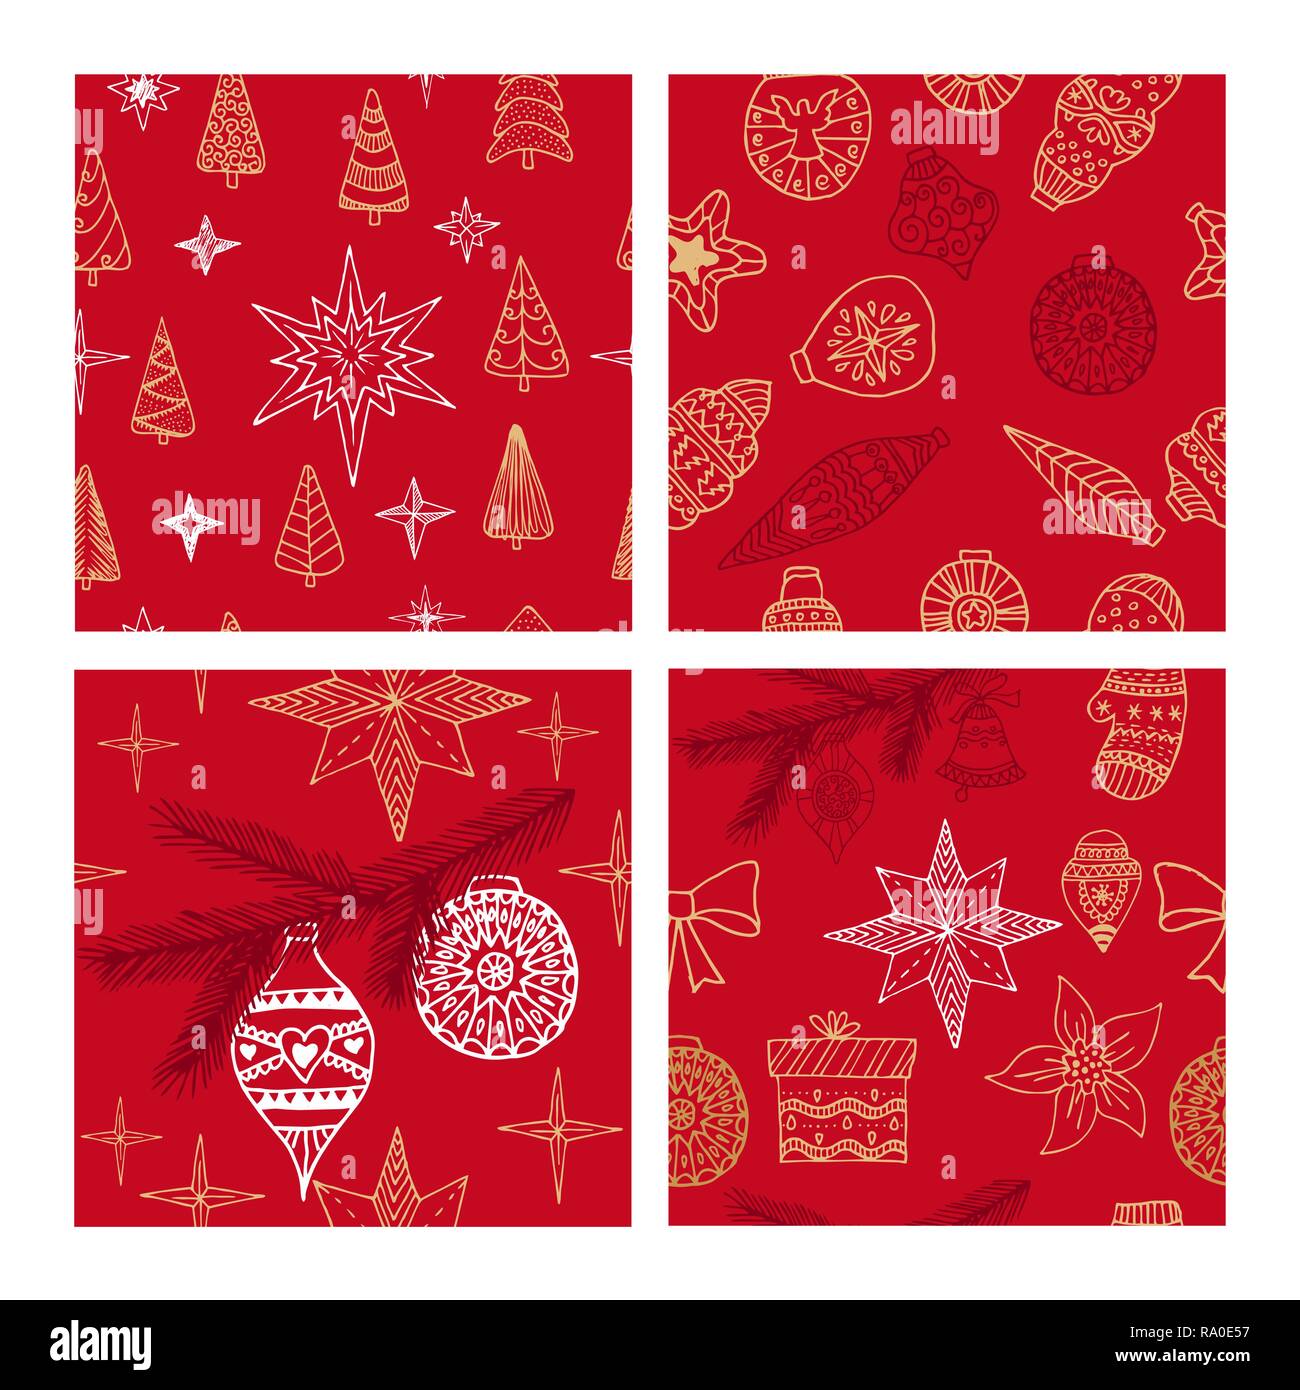 Beautiful seamless Christmas and winter patterns, drawn by hand. Many festive elements and patterns. Vector graphics and illustration. Stock Vector